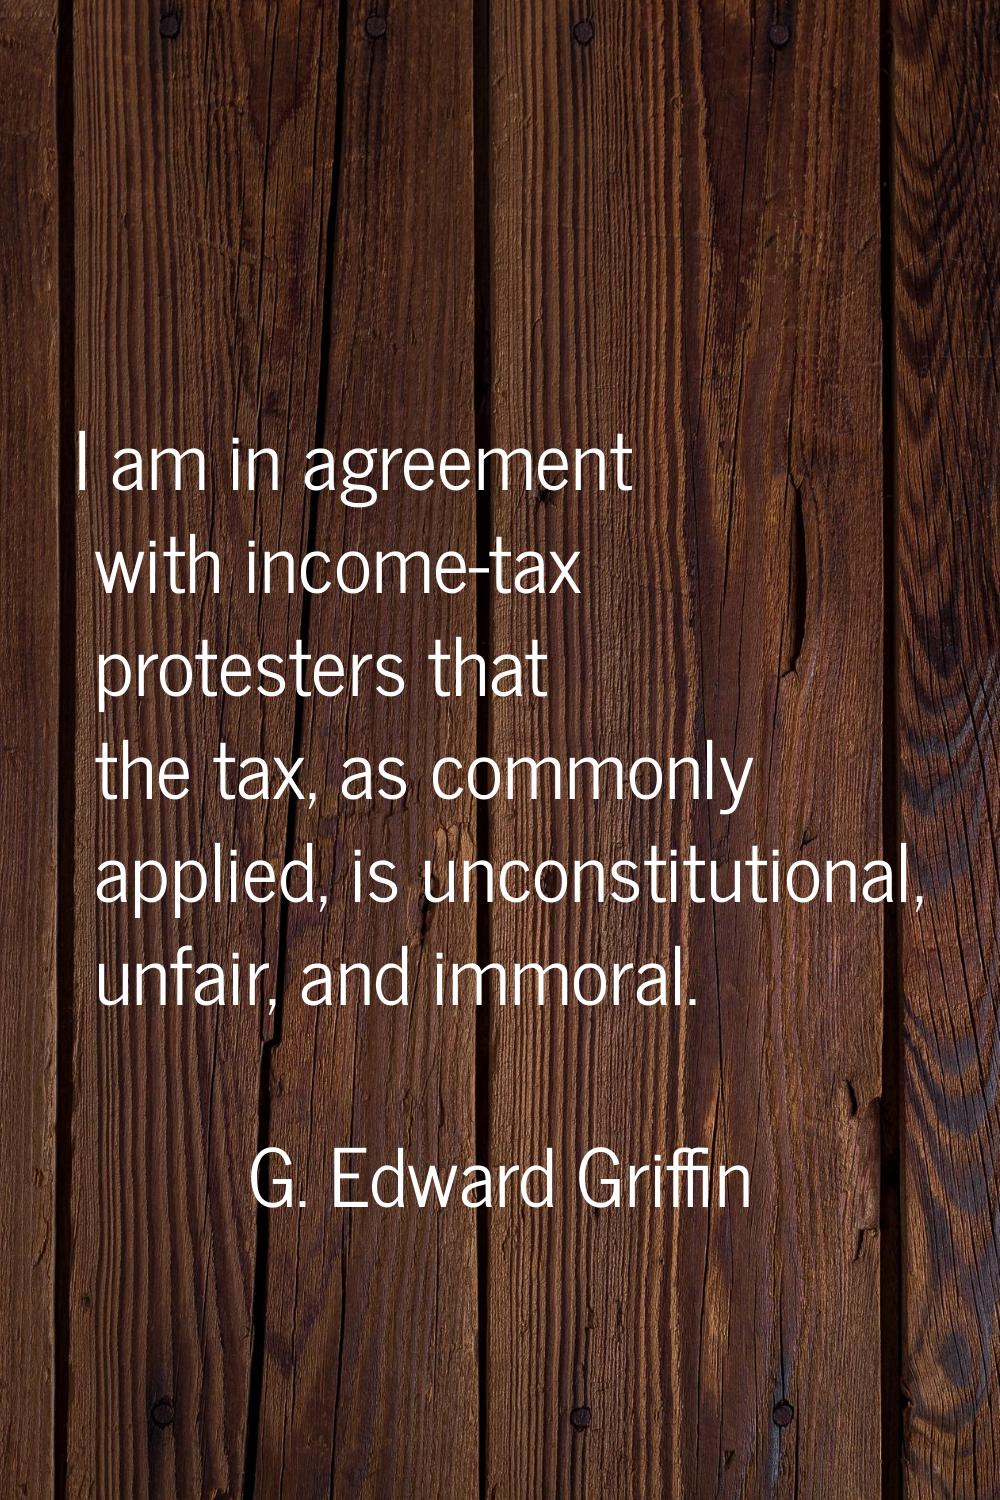 I am in agreement with income-tax protesters that the tax, as commonly applied, is unconstitutional